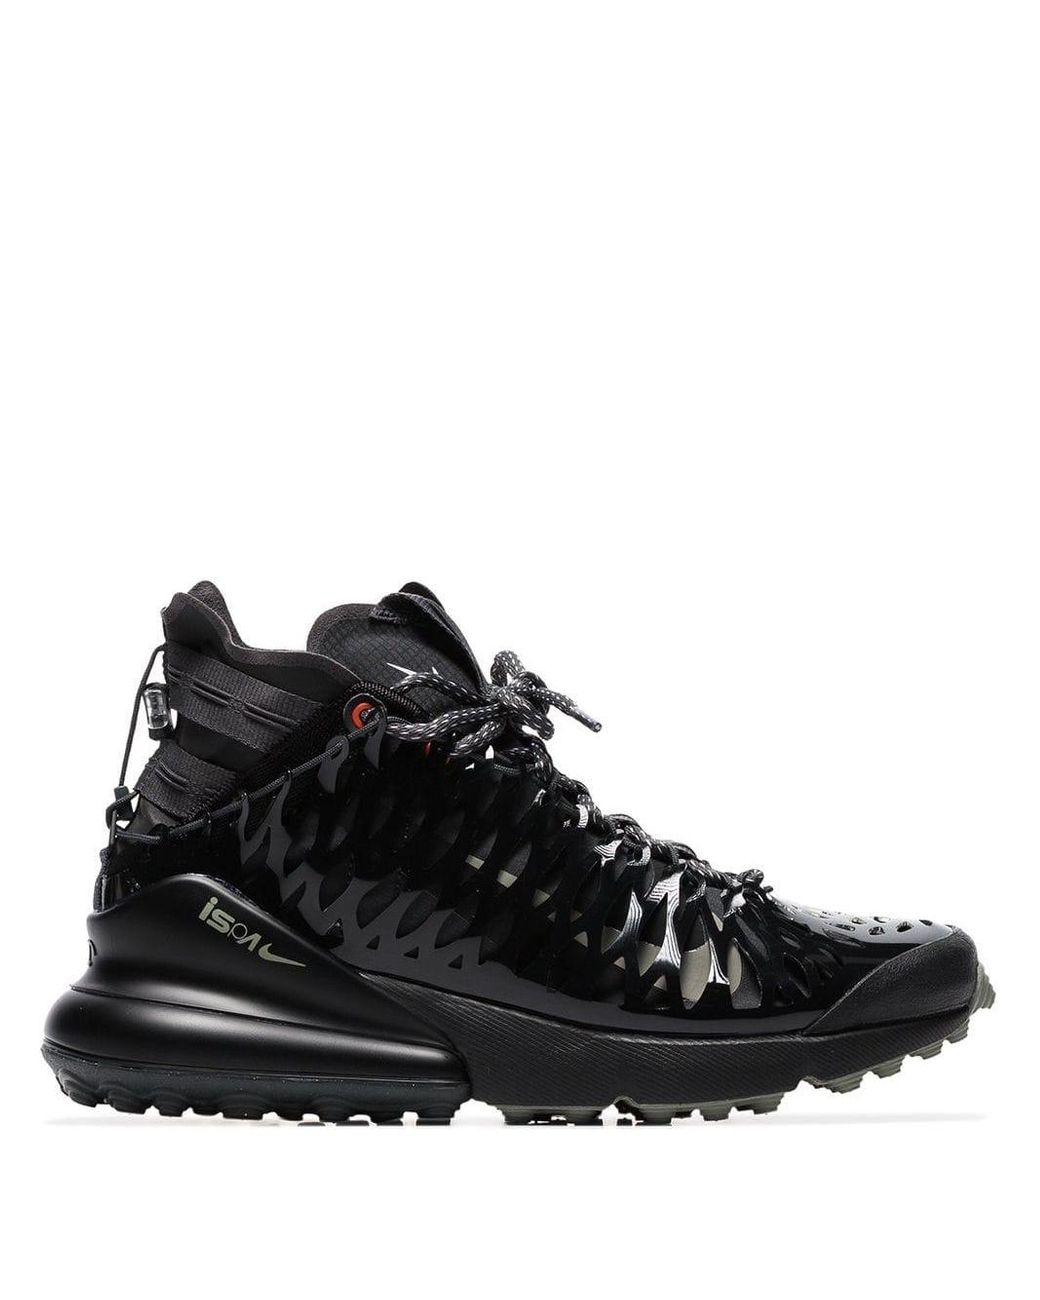 Nike Rubber Black Ispa Air Max 270 High Top Sneakers for Men | Lyst